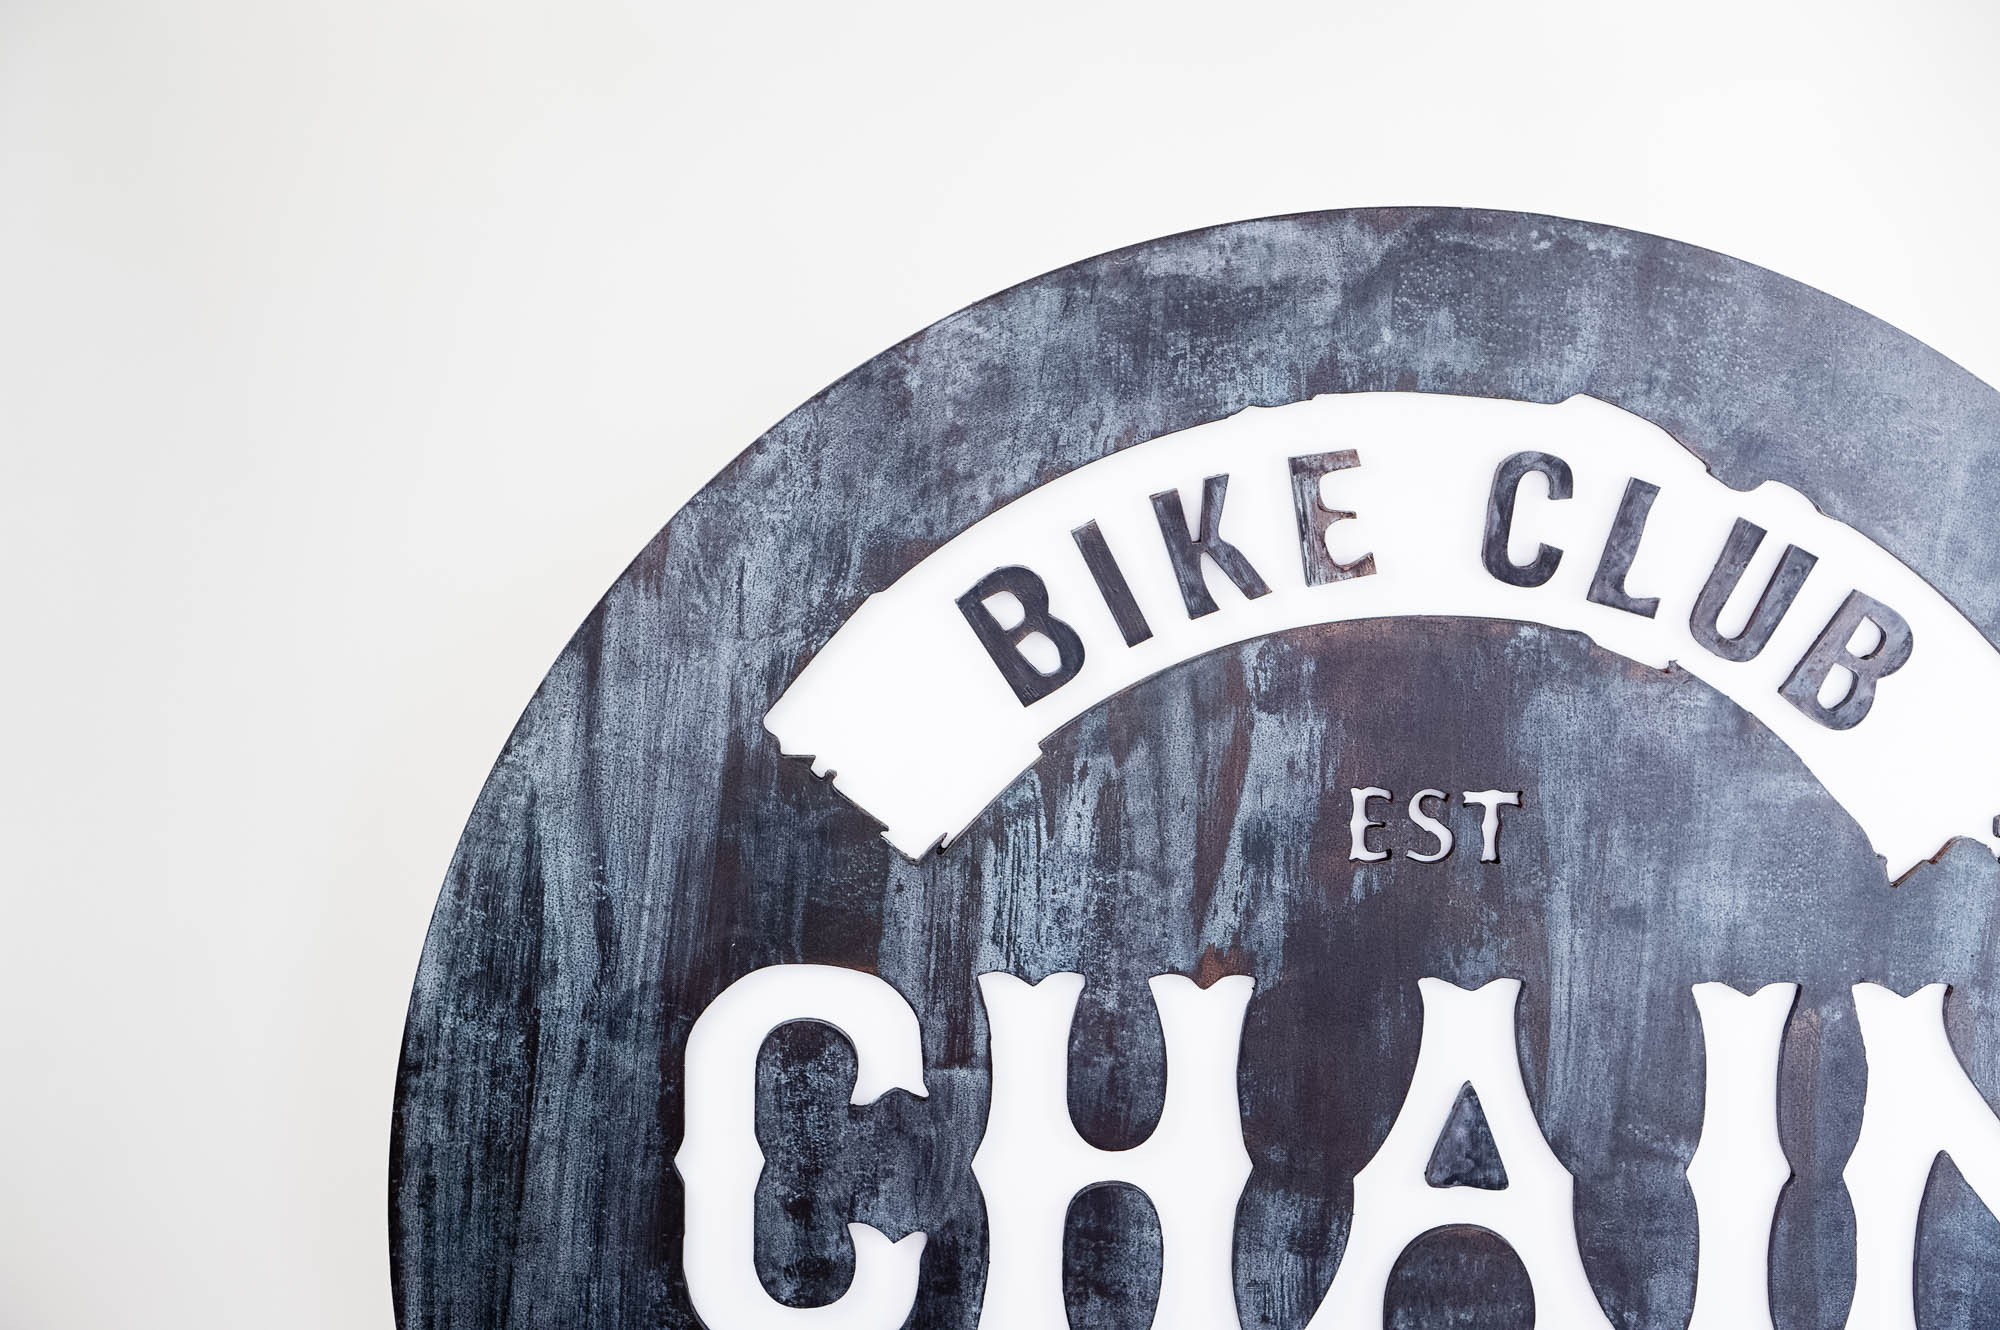 Faux rusty metal illuminated sign for Chain, a cycling studio in Styles Studios Fitness, a fitness club in Peoria, IL.